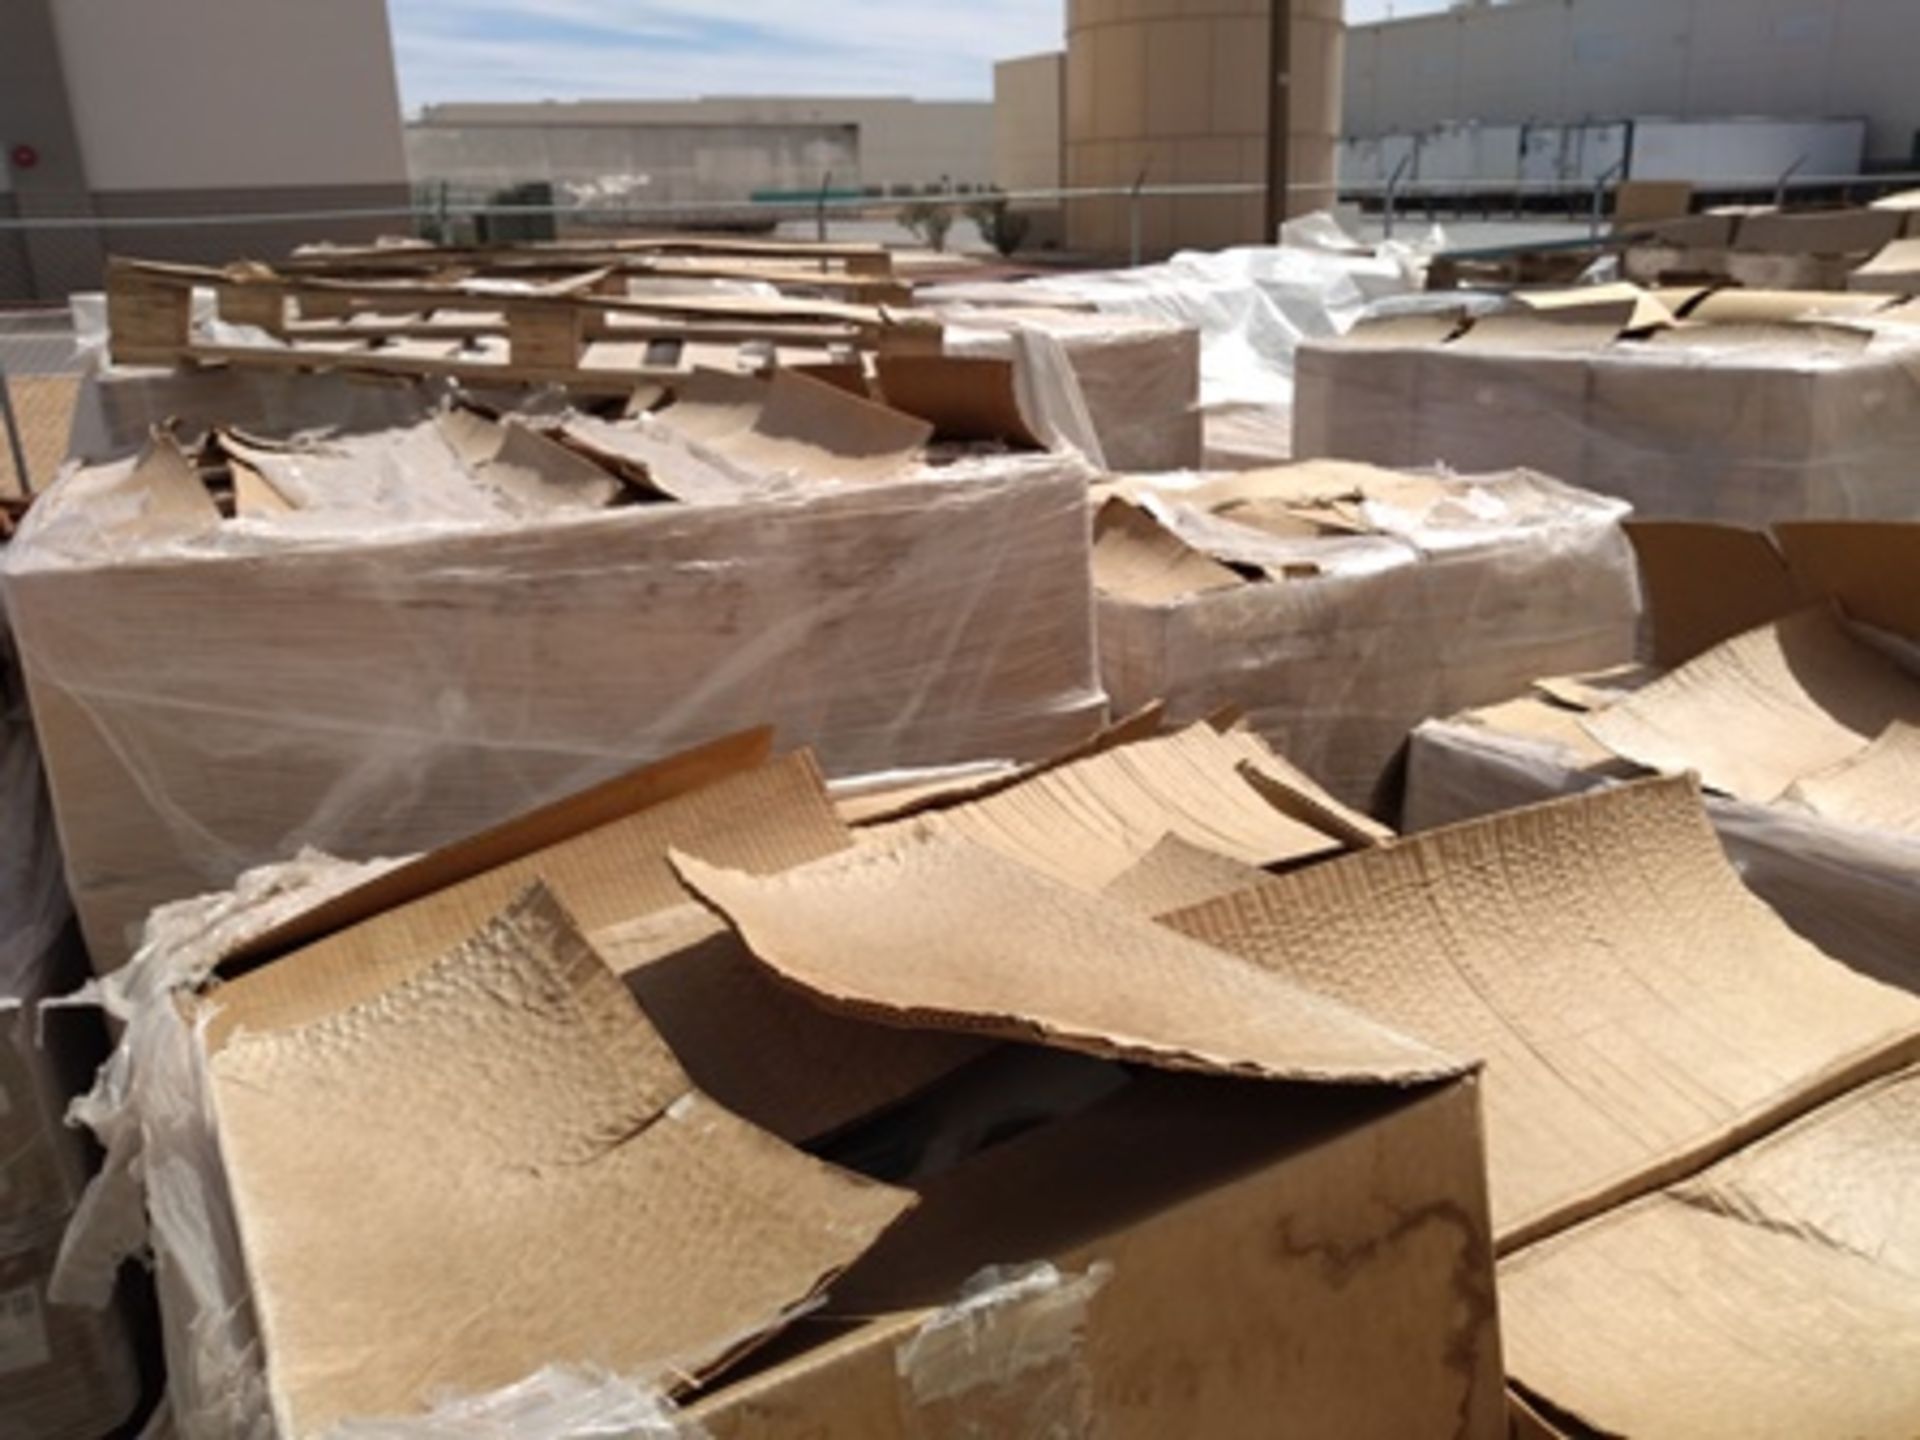 16 pallets containing: 500 boxes of finished product (egraved and shaped esteatita stones). - Image 10 of 12